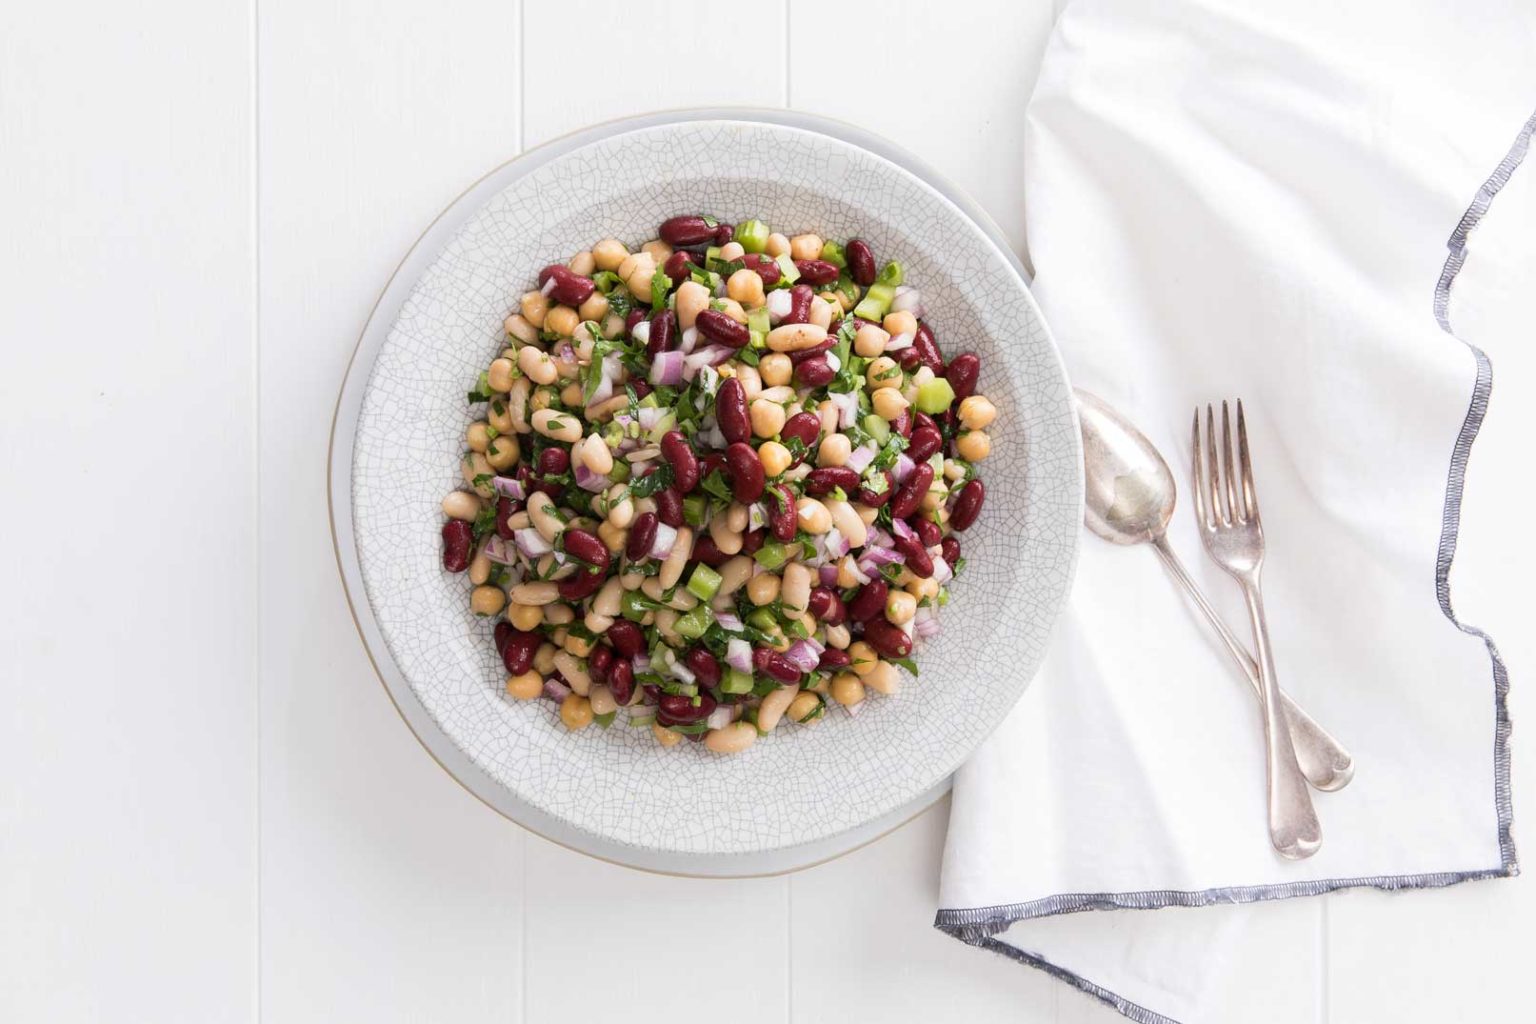 Classic bean salad in a large serving bowl with a metal spoon and fork and cloth napkin with blue trim on the side.